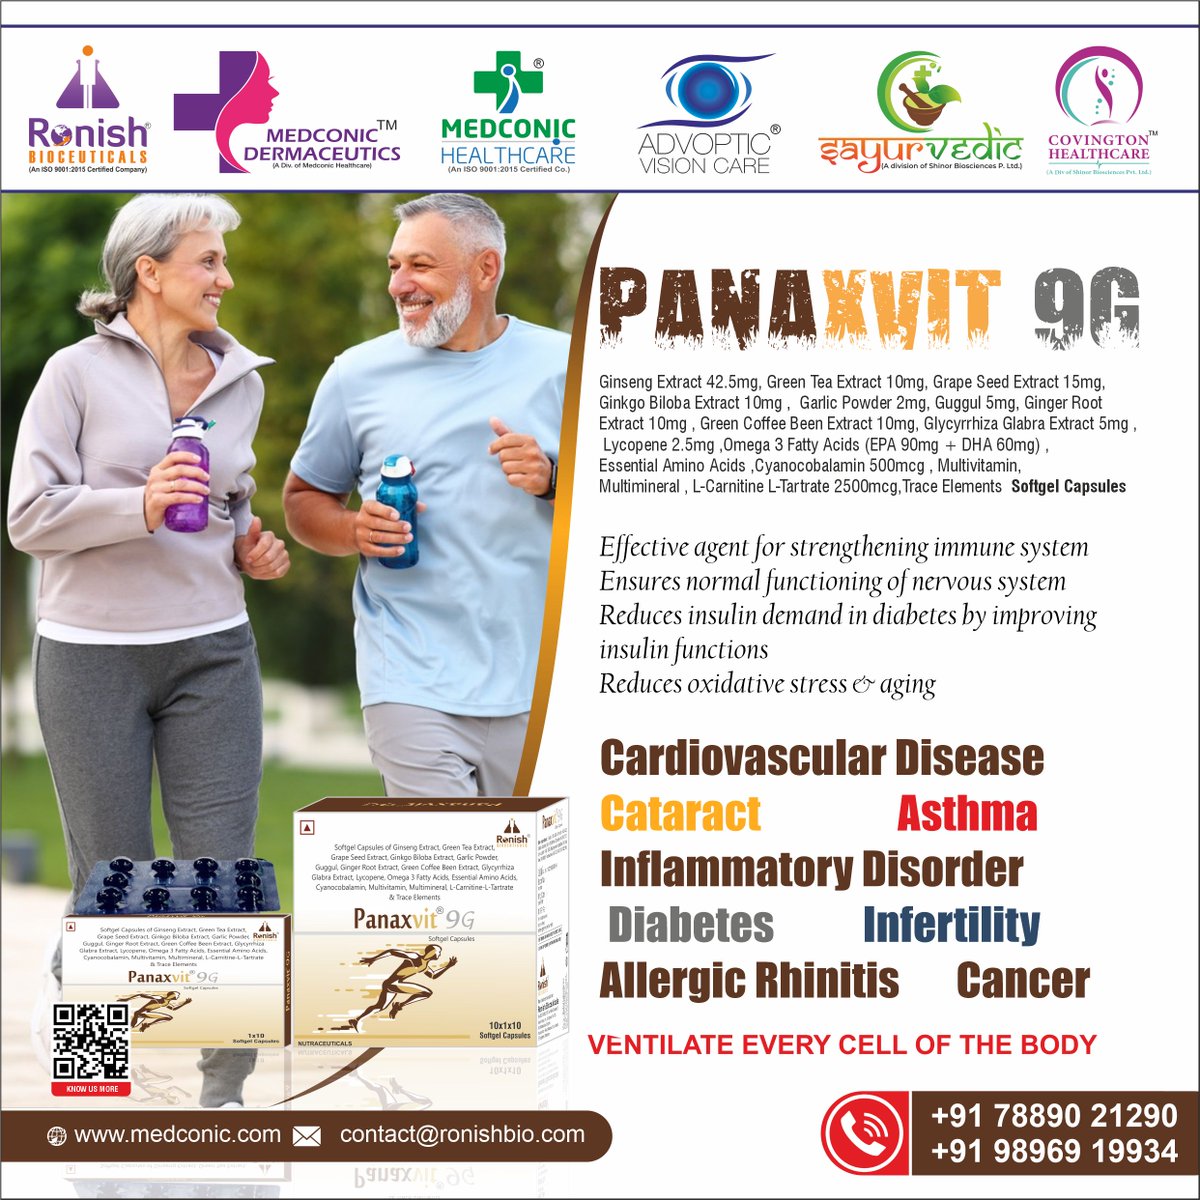 🌱 Introducing PANAXVIT-9G! 🌿

Our composition includes Biloba Extract, Garlic Powder, Guggul, Ginger Root Extract, Green Coffee Bean Extract, and more! 💊

#HealthIsWealth #WellnessJourney #NaturalSupplements #PCDPharmaFranchise #RonishBioceuticals #Panaxvit9G #HolisticHealth